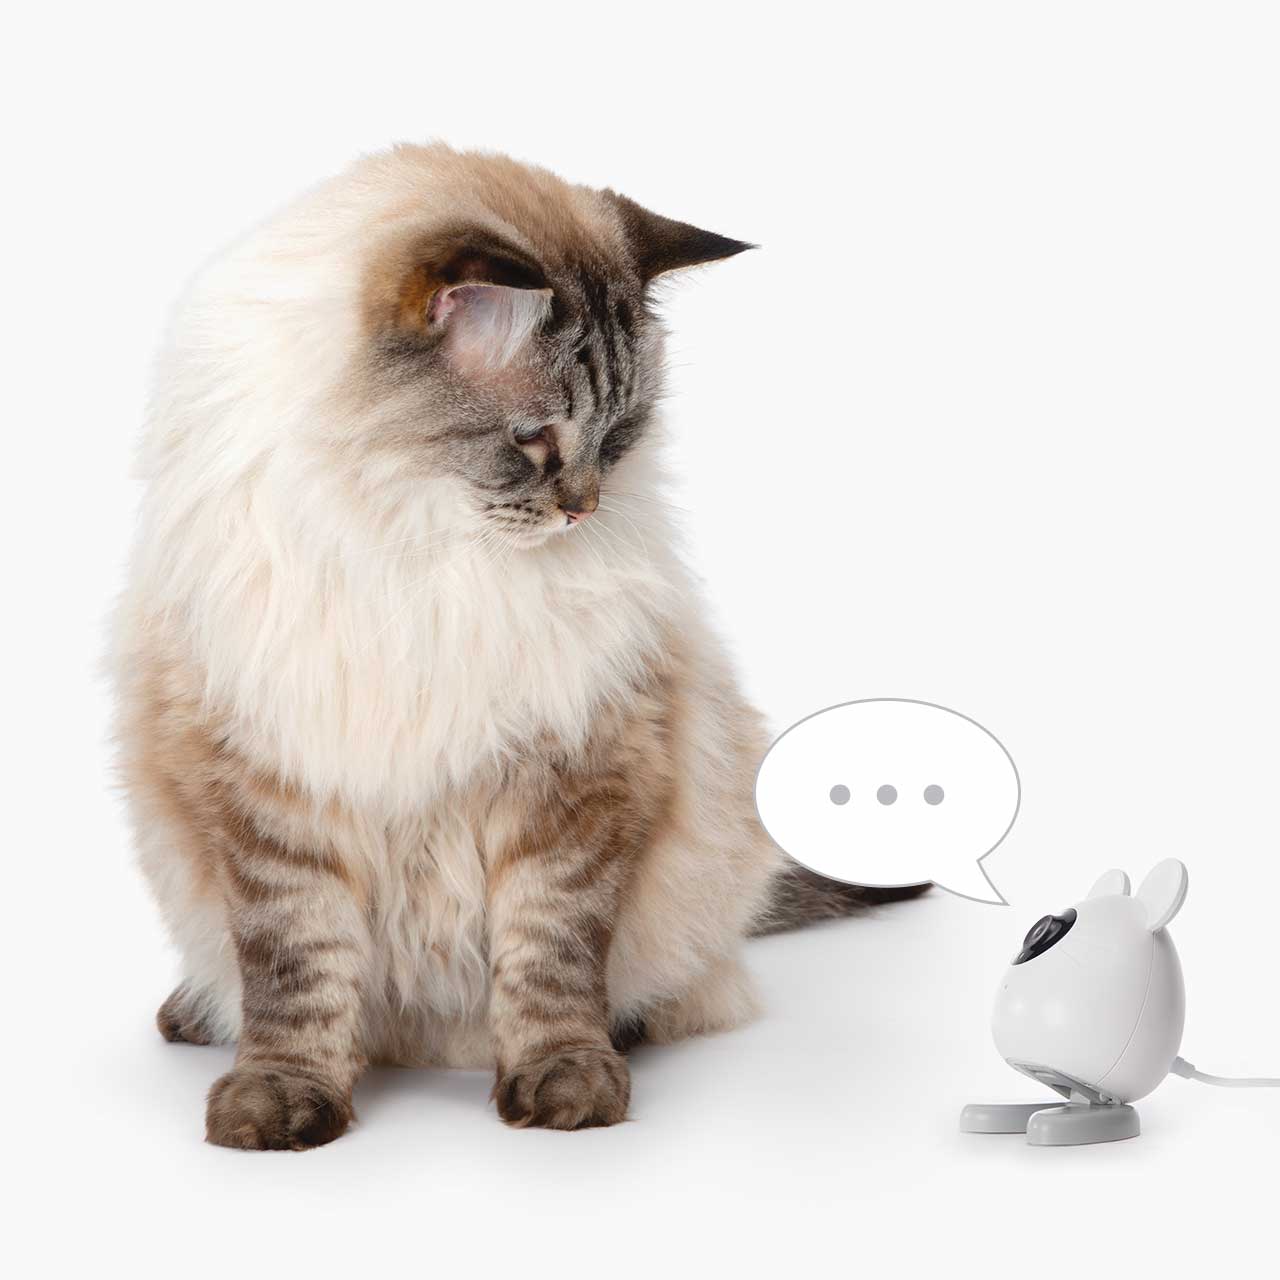 Two way audio - talk to your cat